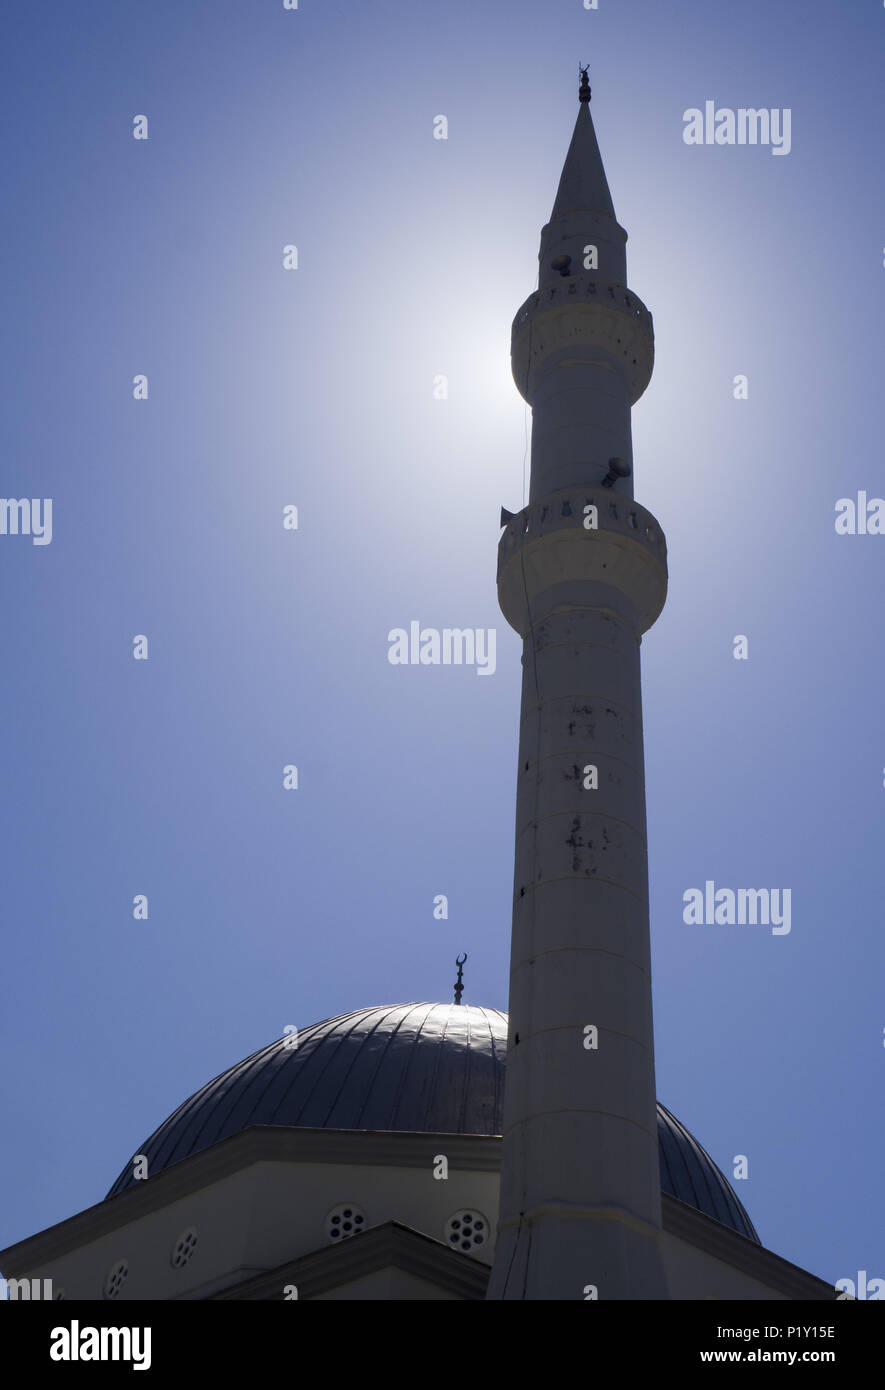 Islam mosk silhuette in sun Stock Photo